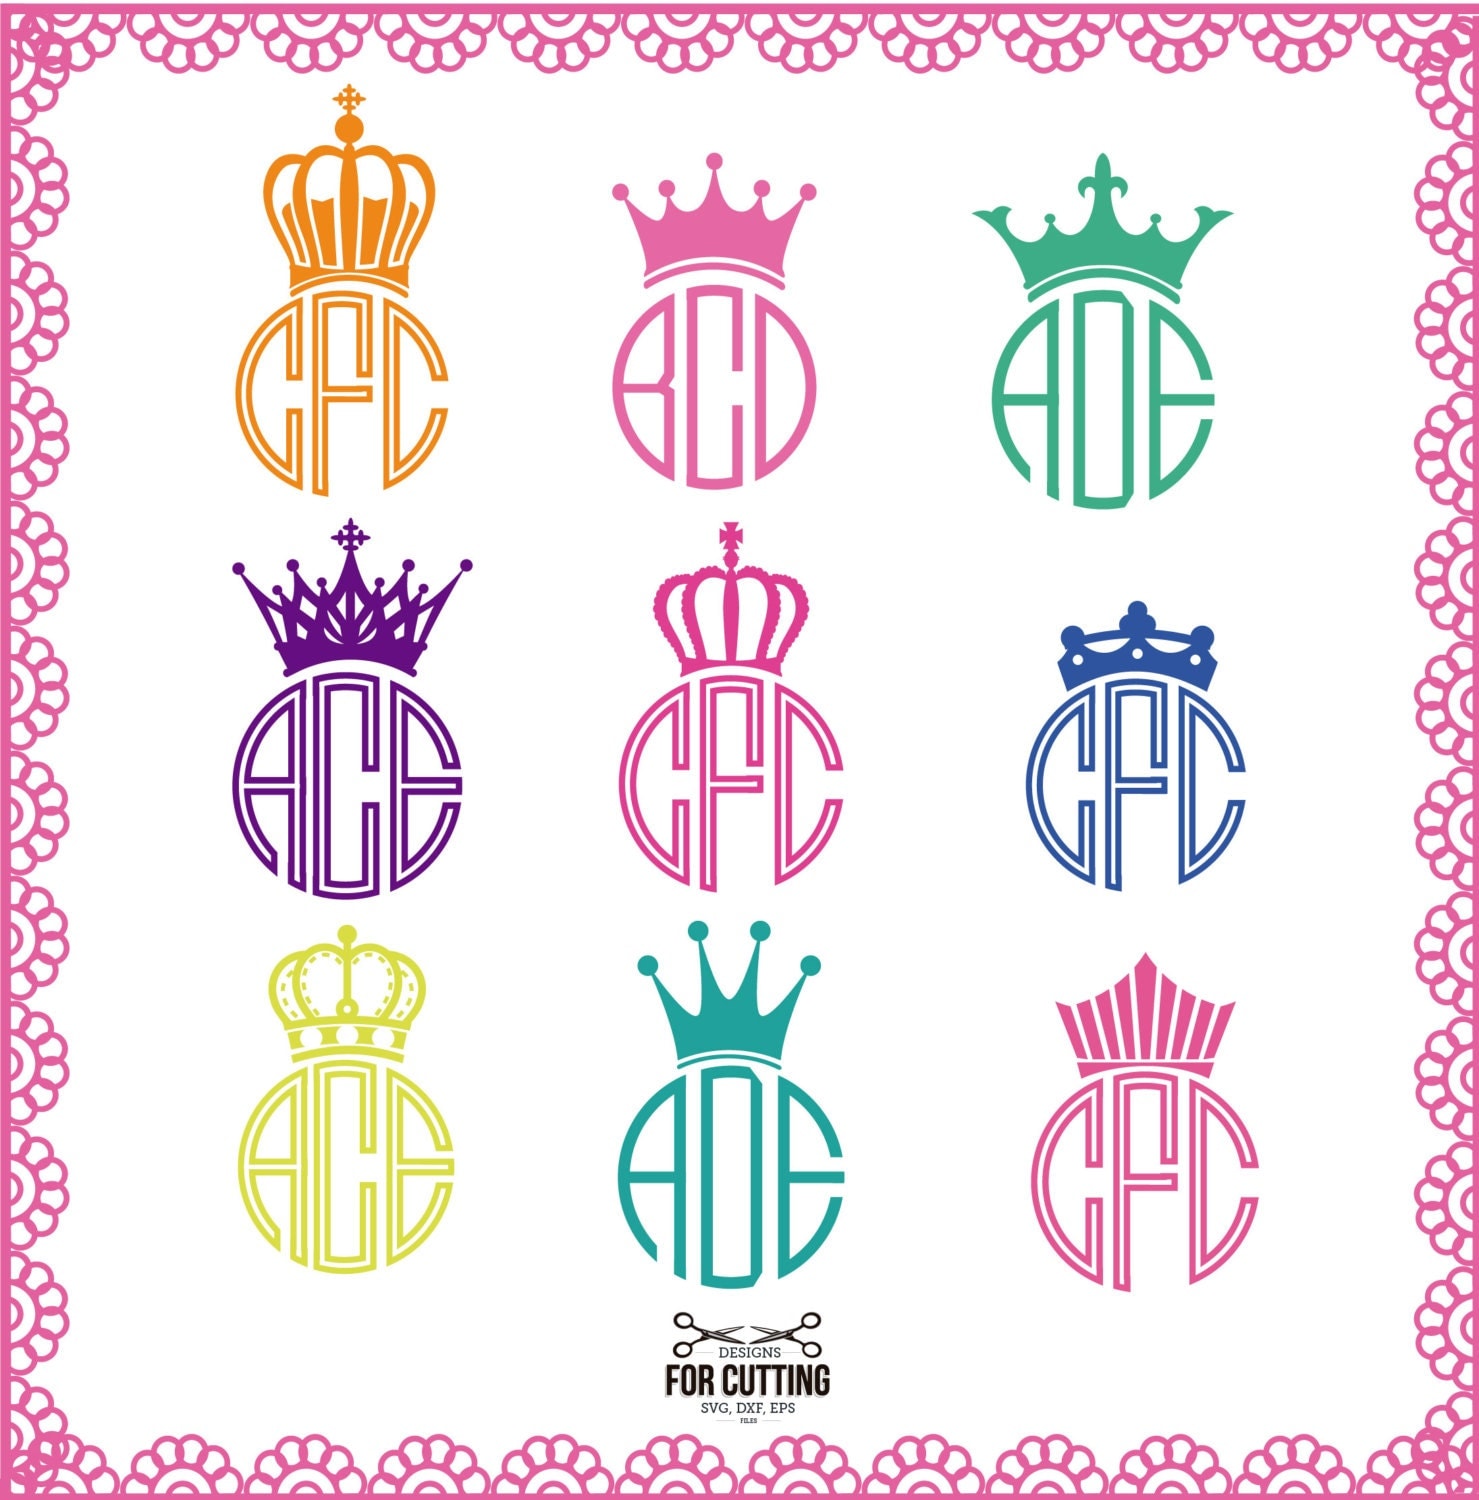 Download Crown Monogram Frames cut Files SVG DXF EPS. Cutting or